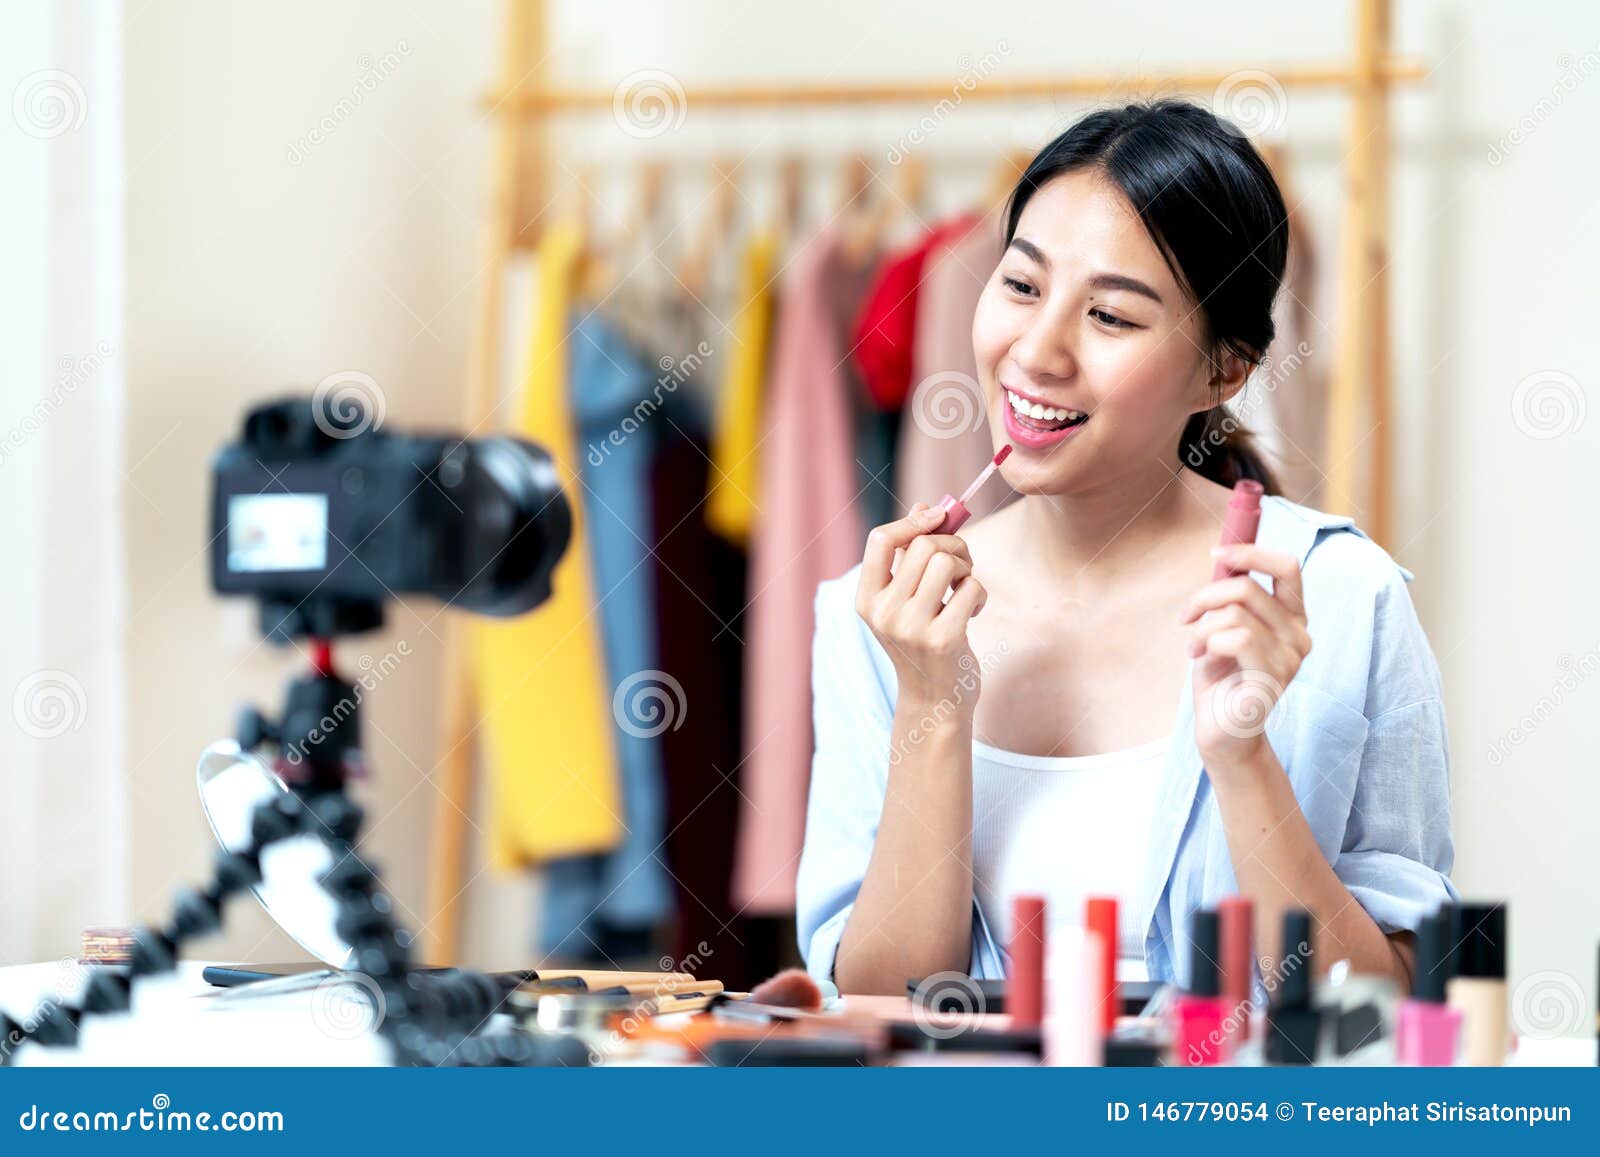 portrait or headshot of attractive young asian influencer, beauty blogger, content creator or vlogger girl review make up looking